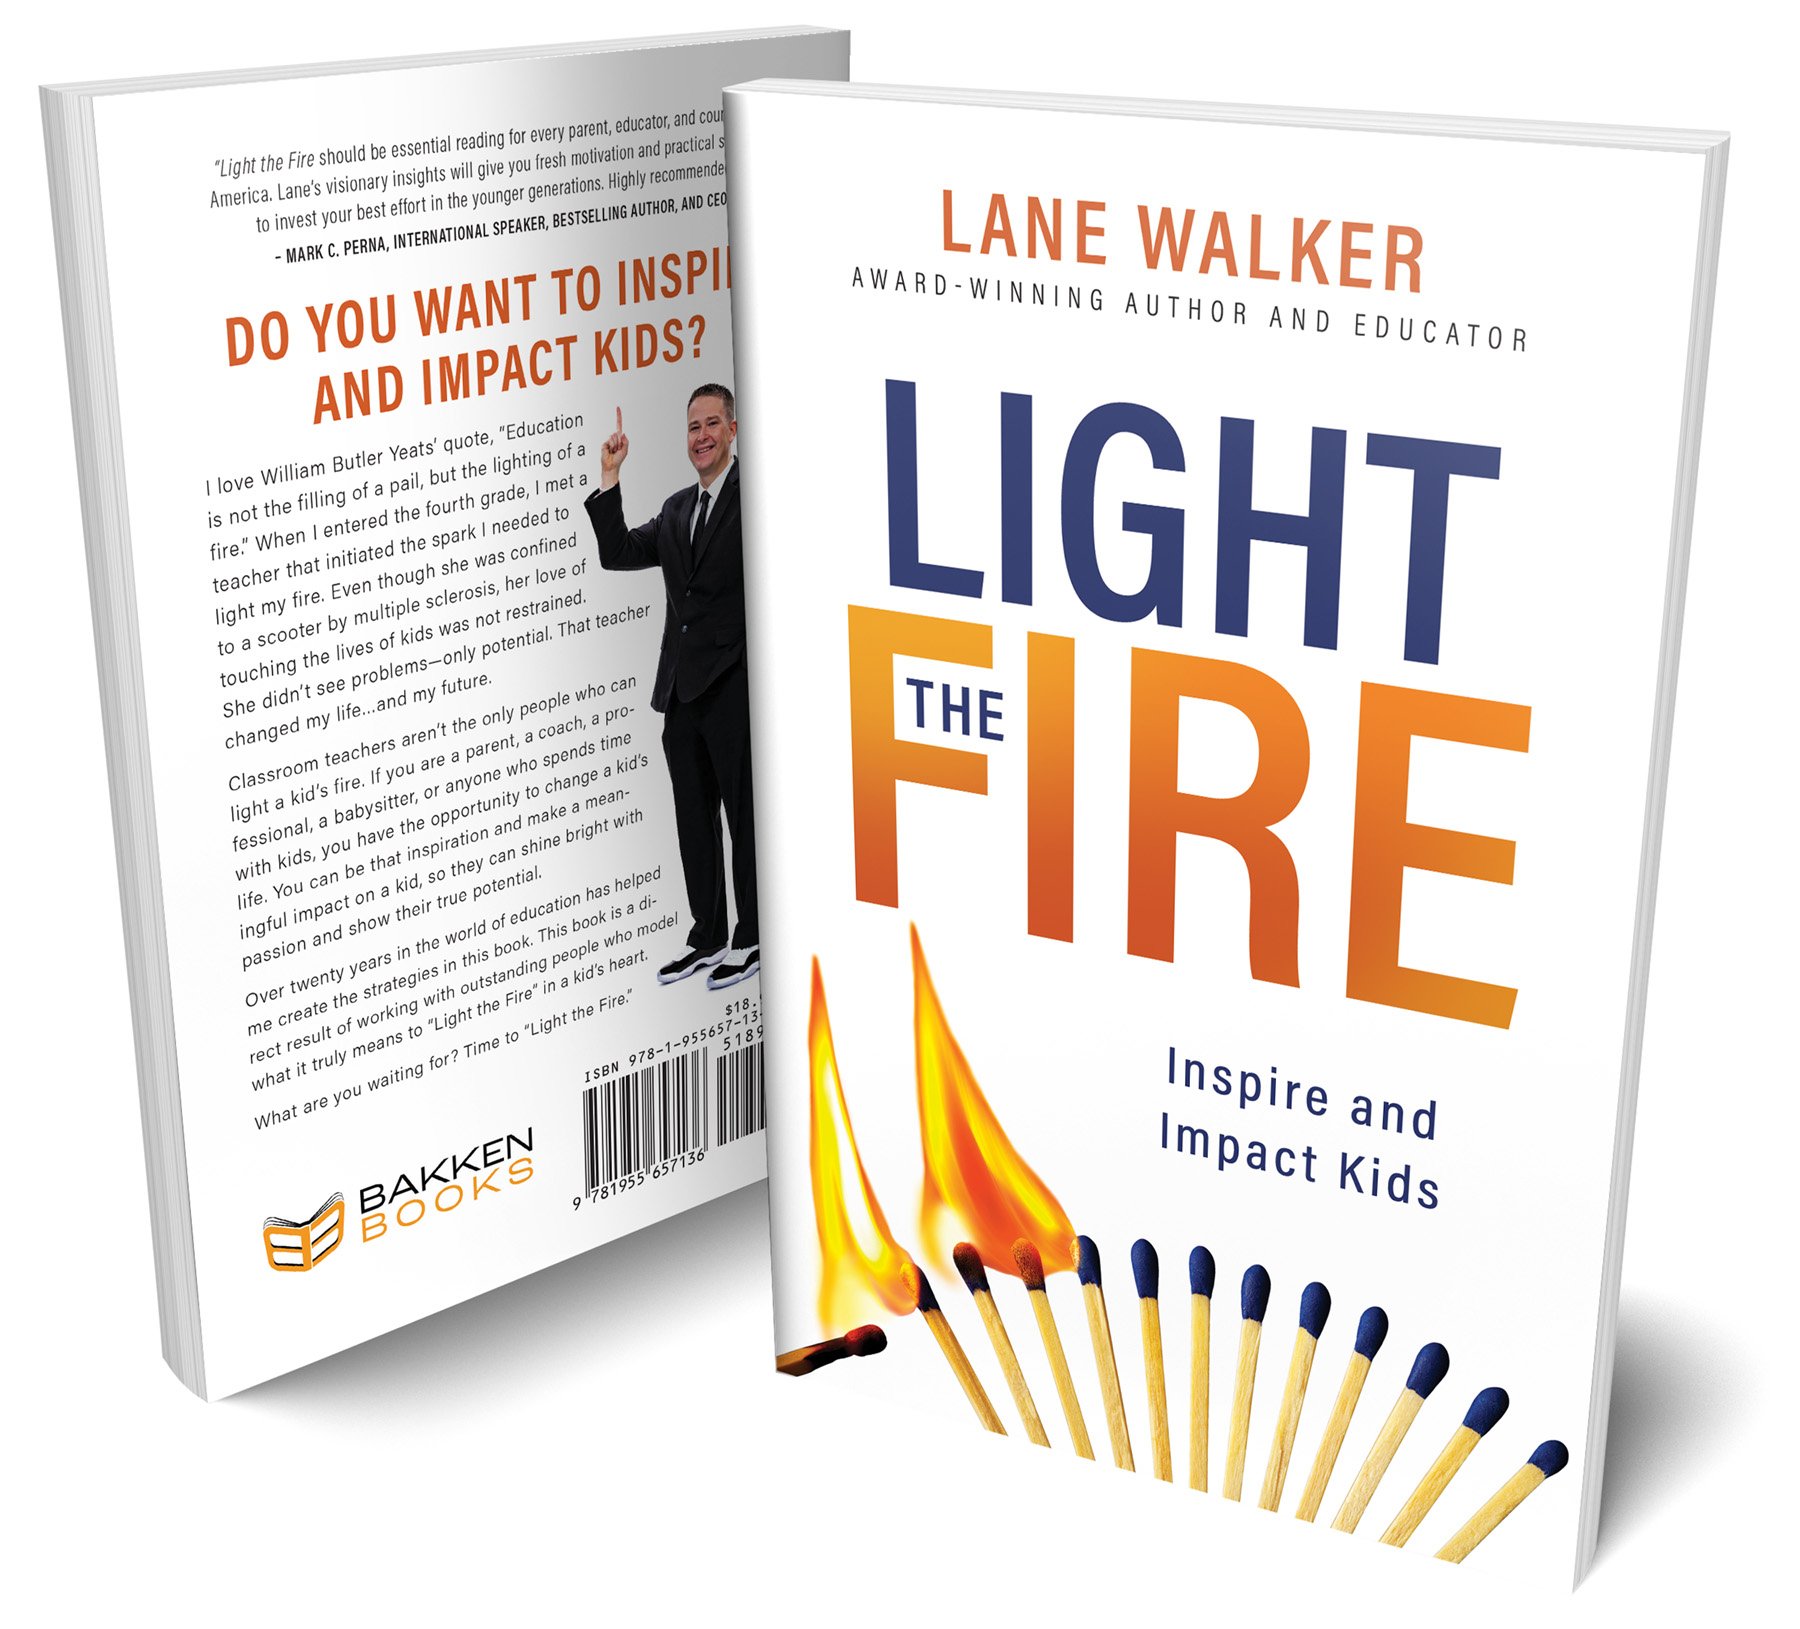 Lane Walker Inspires & Impacts Kids — Kathy J Perry, Author & Speaker   Character driven books and journals with Christian themes for children,  tweens, teens and young adults